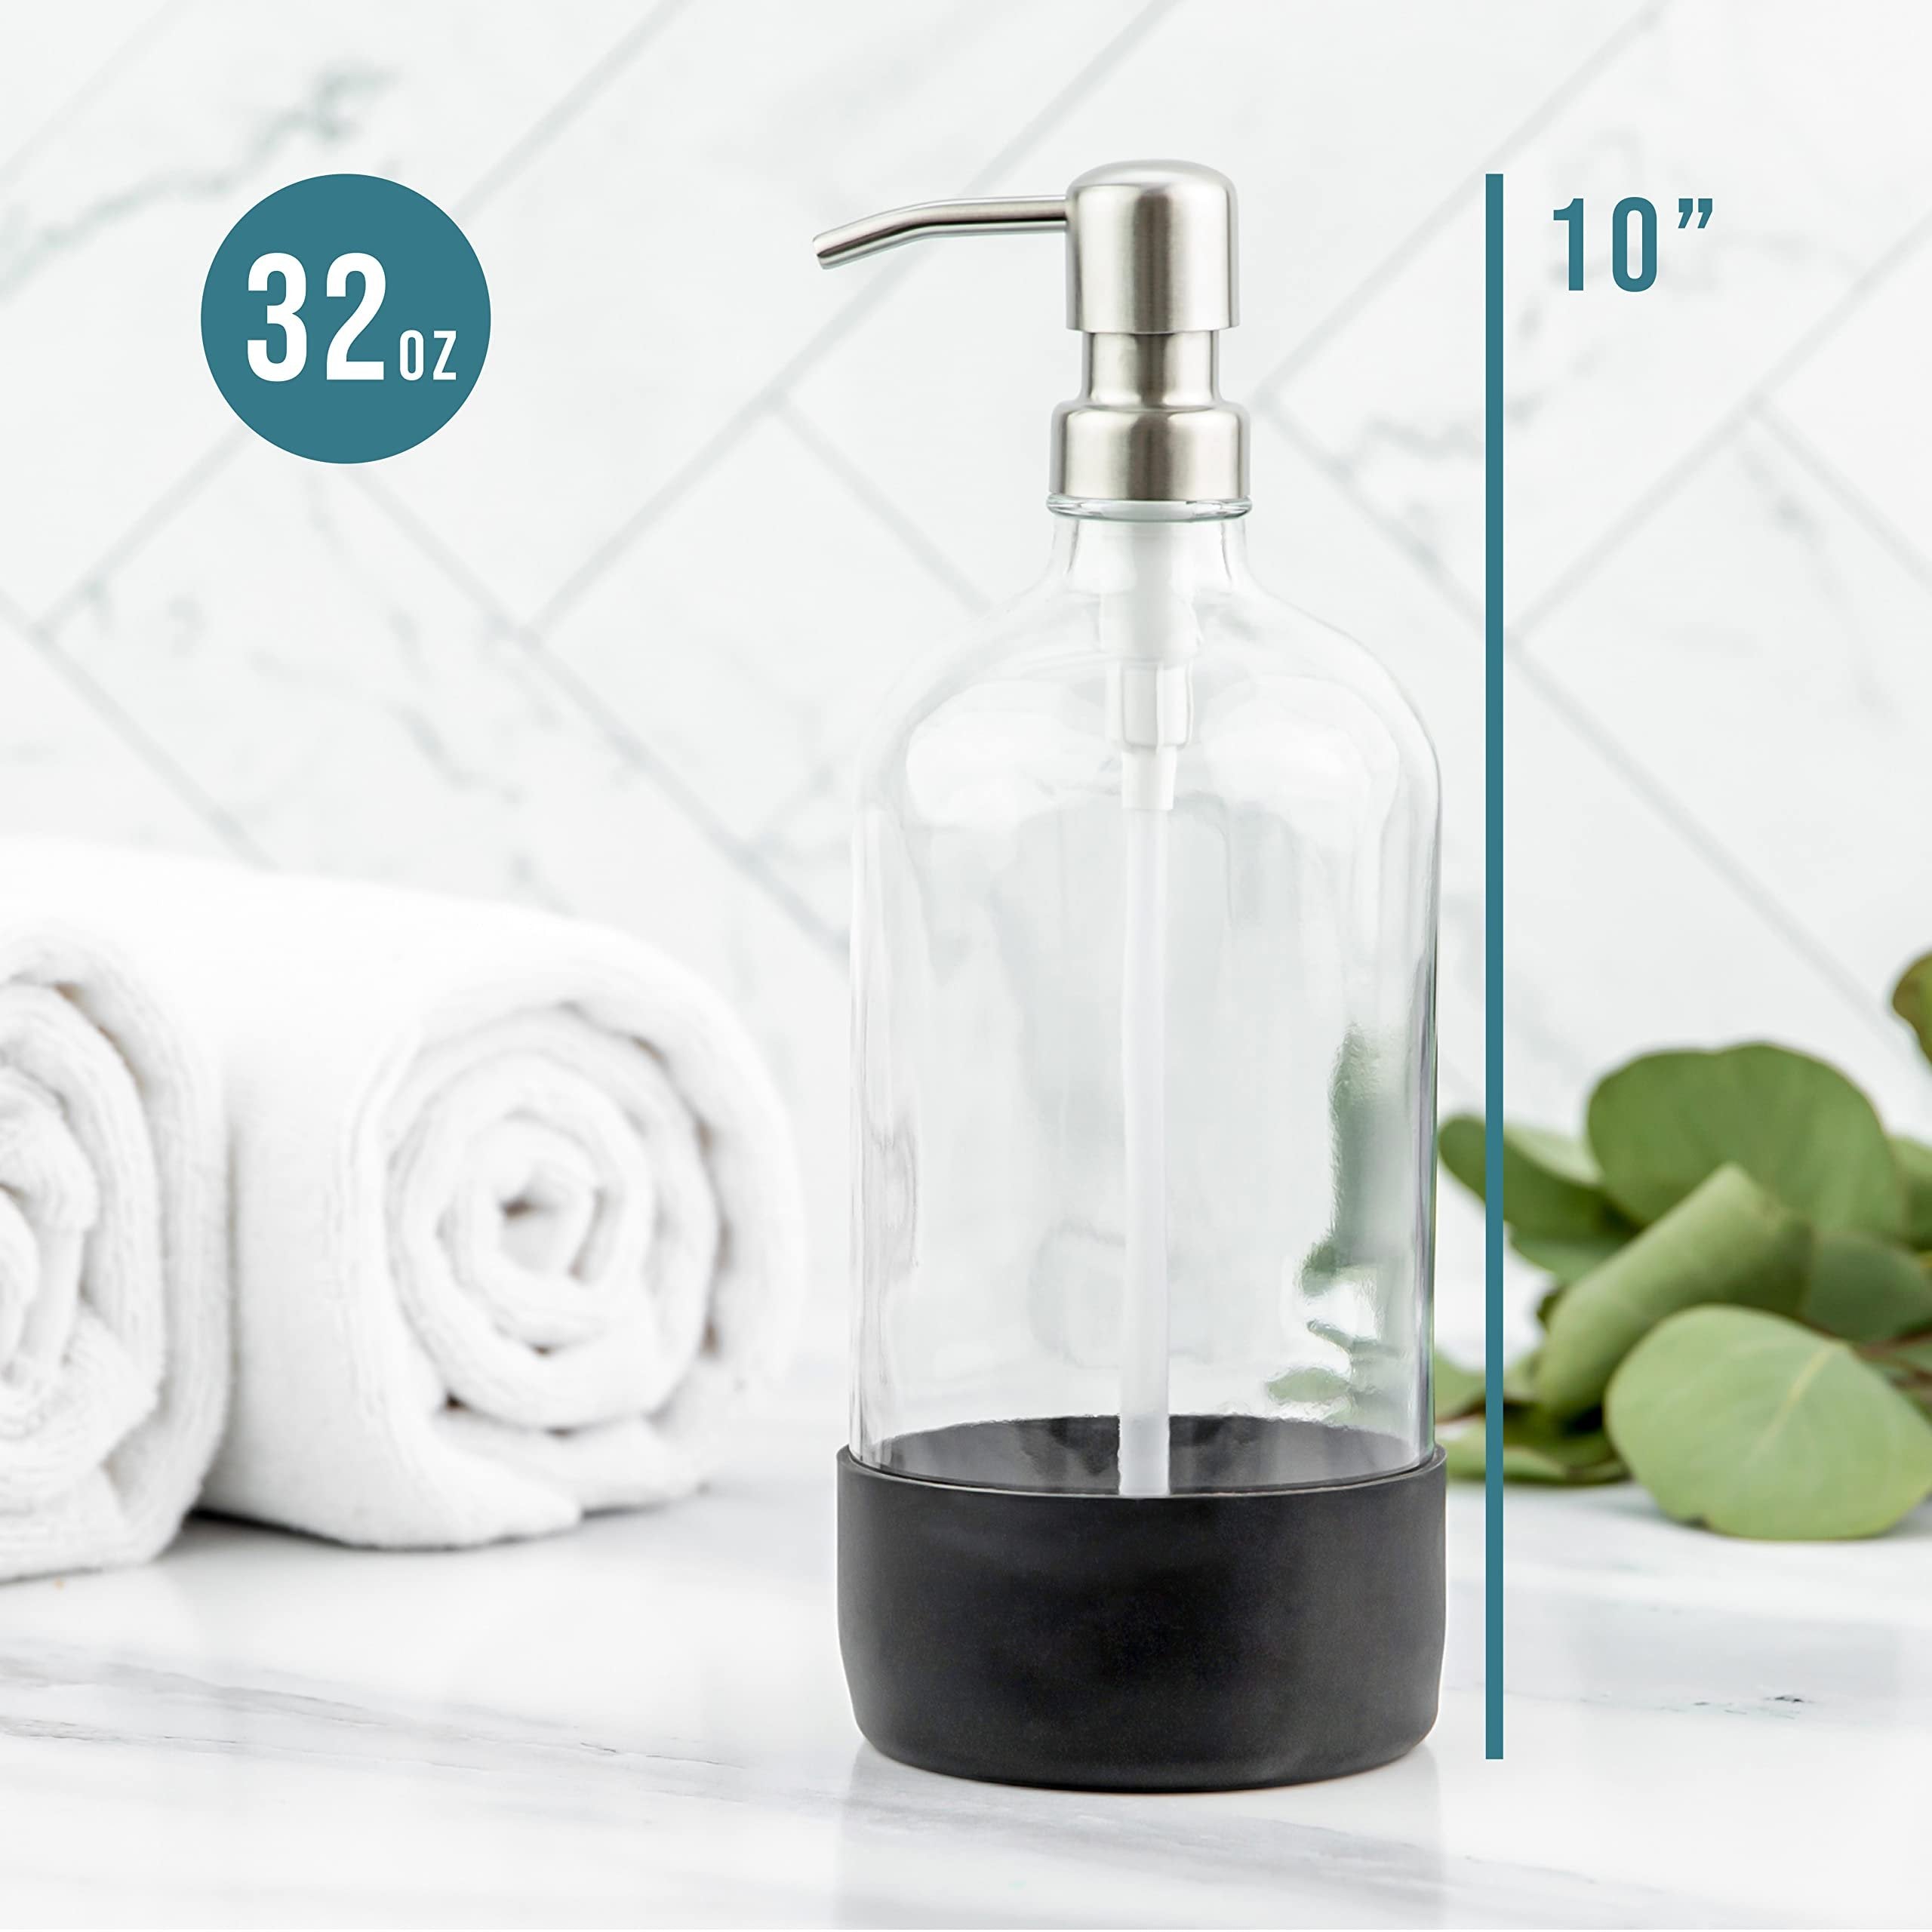 32 oz Glass Pump Bottle Rustproof Stainless Steel Pump, Funnel, and Lids. Modern Farmhouse Vintage Jar, Large Glass Shampoo Bottles with Pump and Laundry Soap Dispenser - Silver